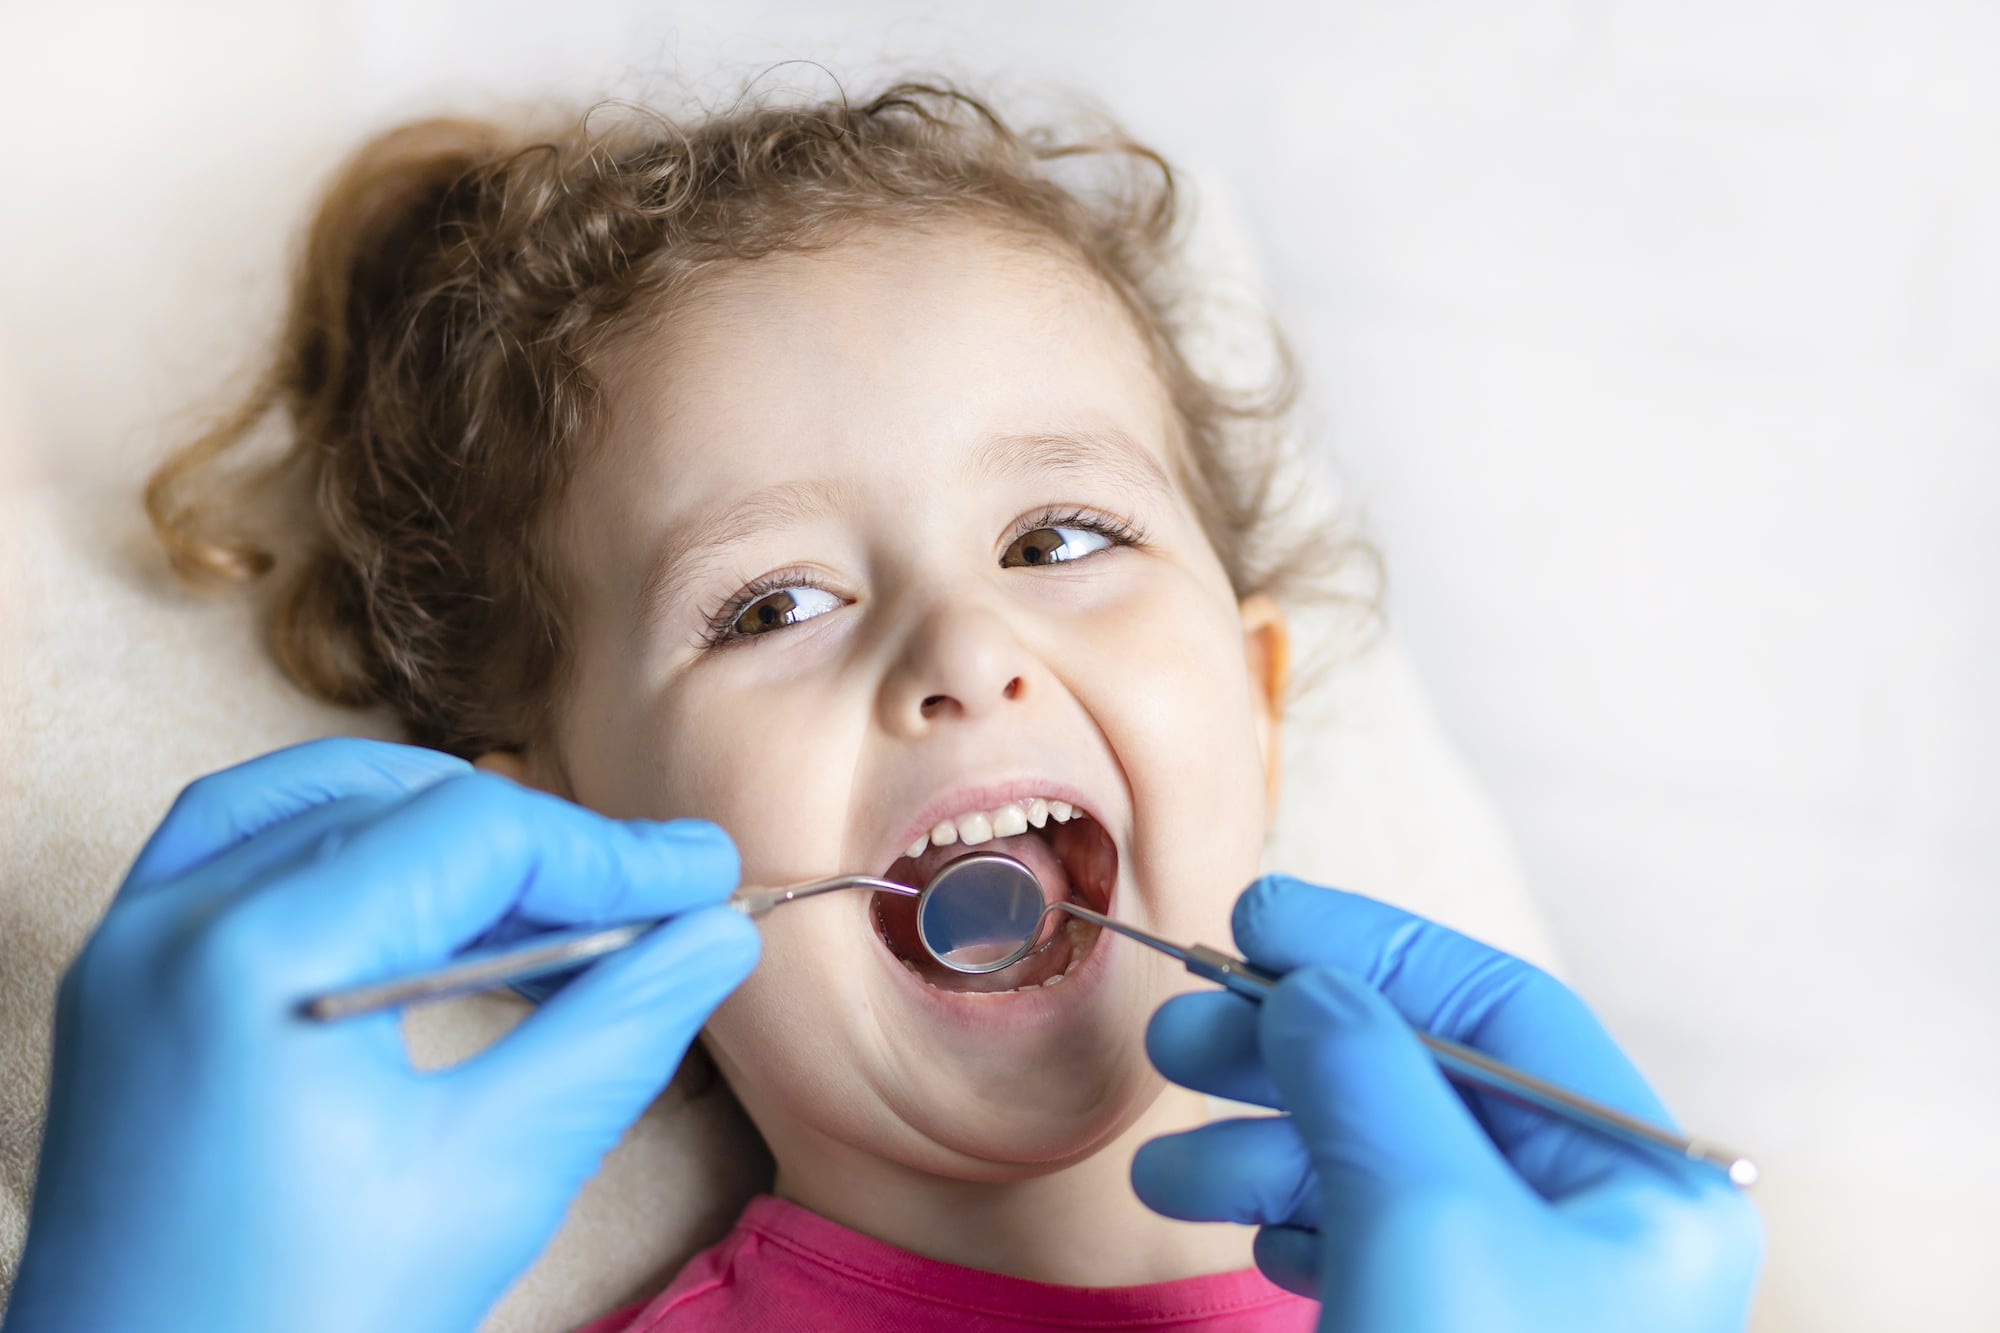 examination-treatment-teeth-children-medical-checkup-oral-cavity-with-instruments-dental-hands-child-clinic